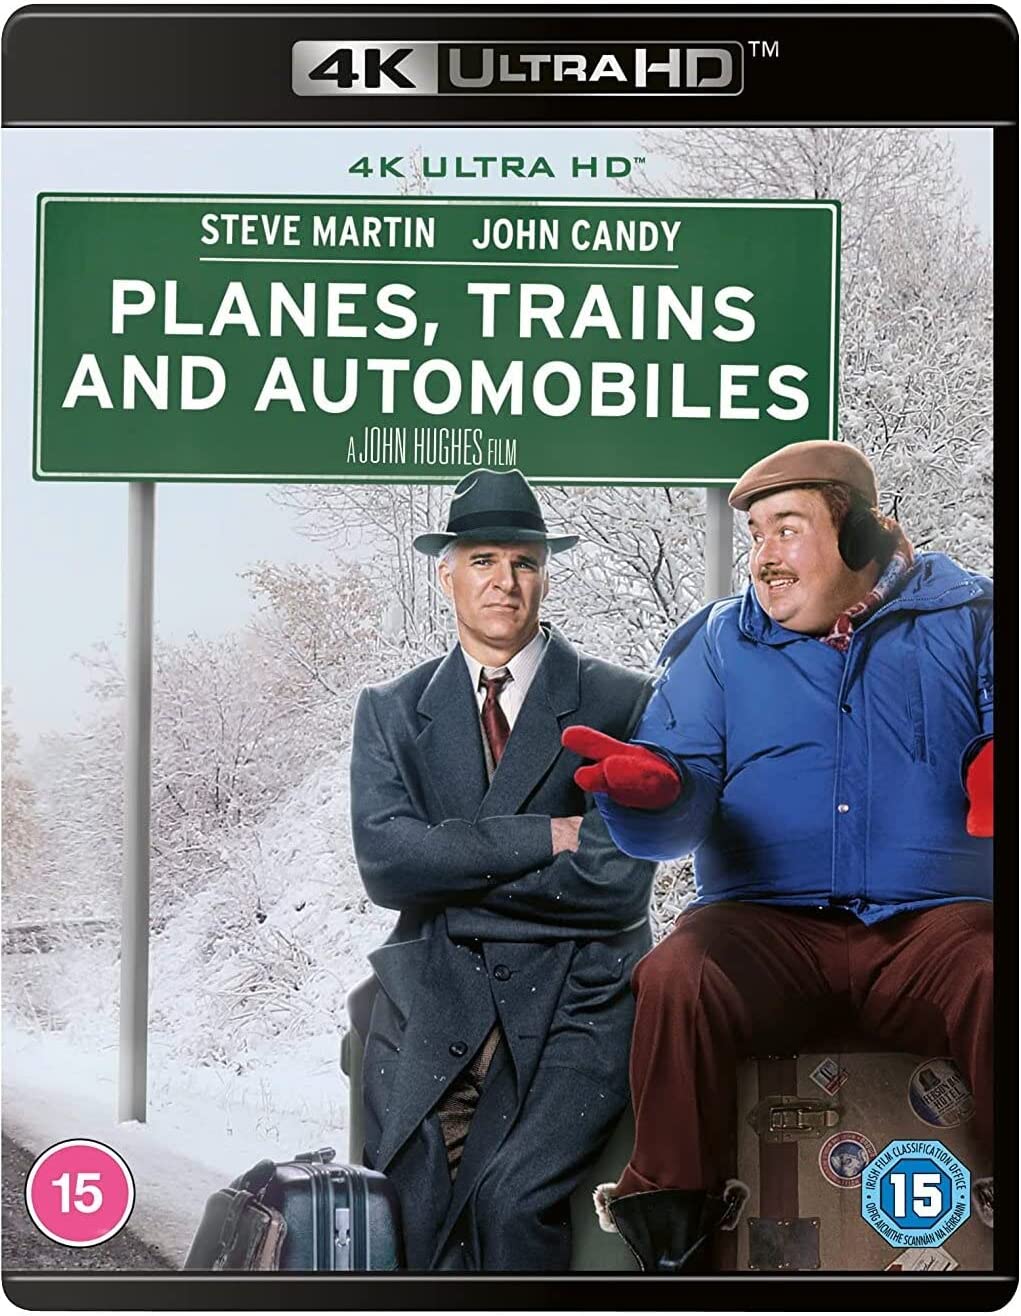 Steve Martin and John Candy star in the iconic Planes, Trains and Automobiles – and it’s coming to 4K UHD for the first time!